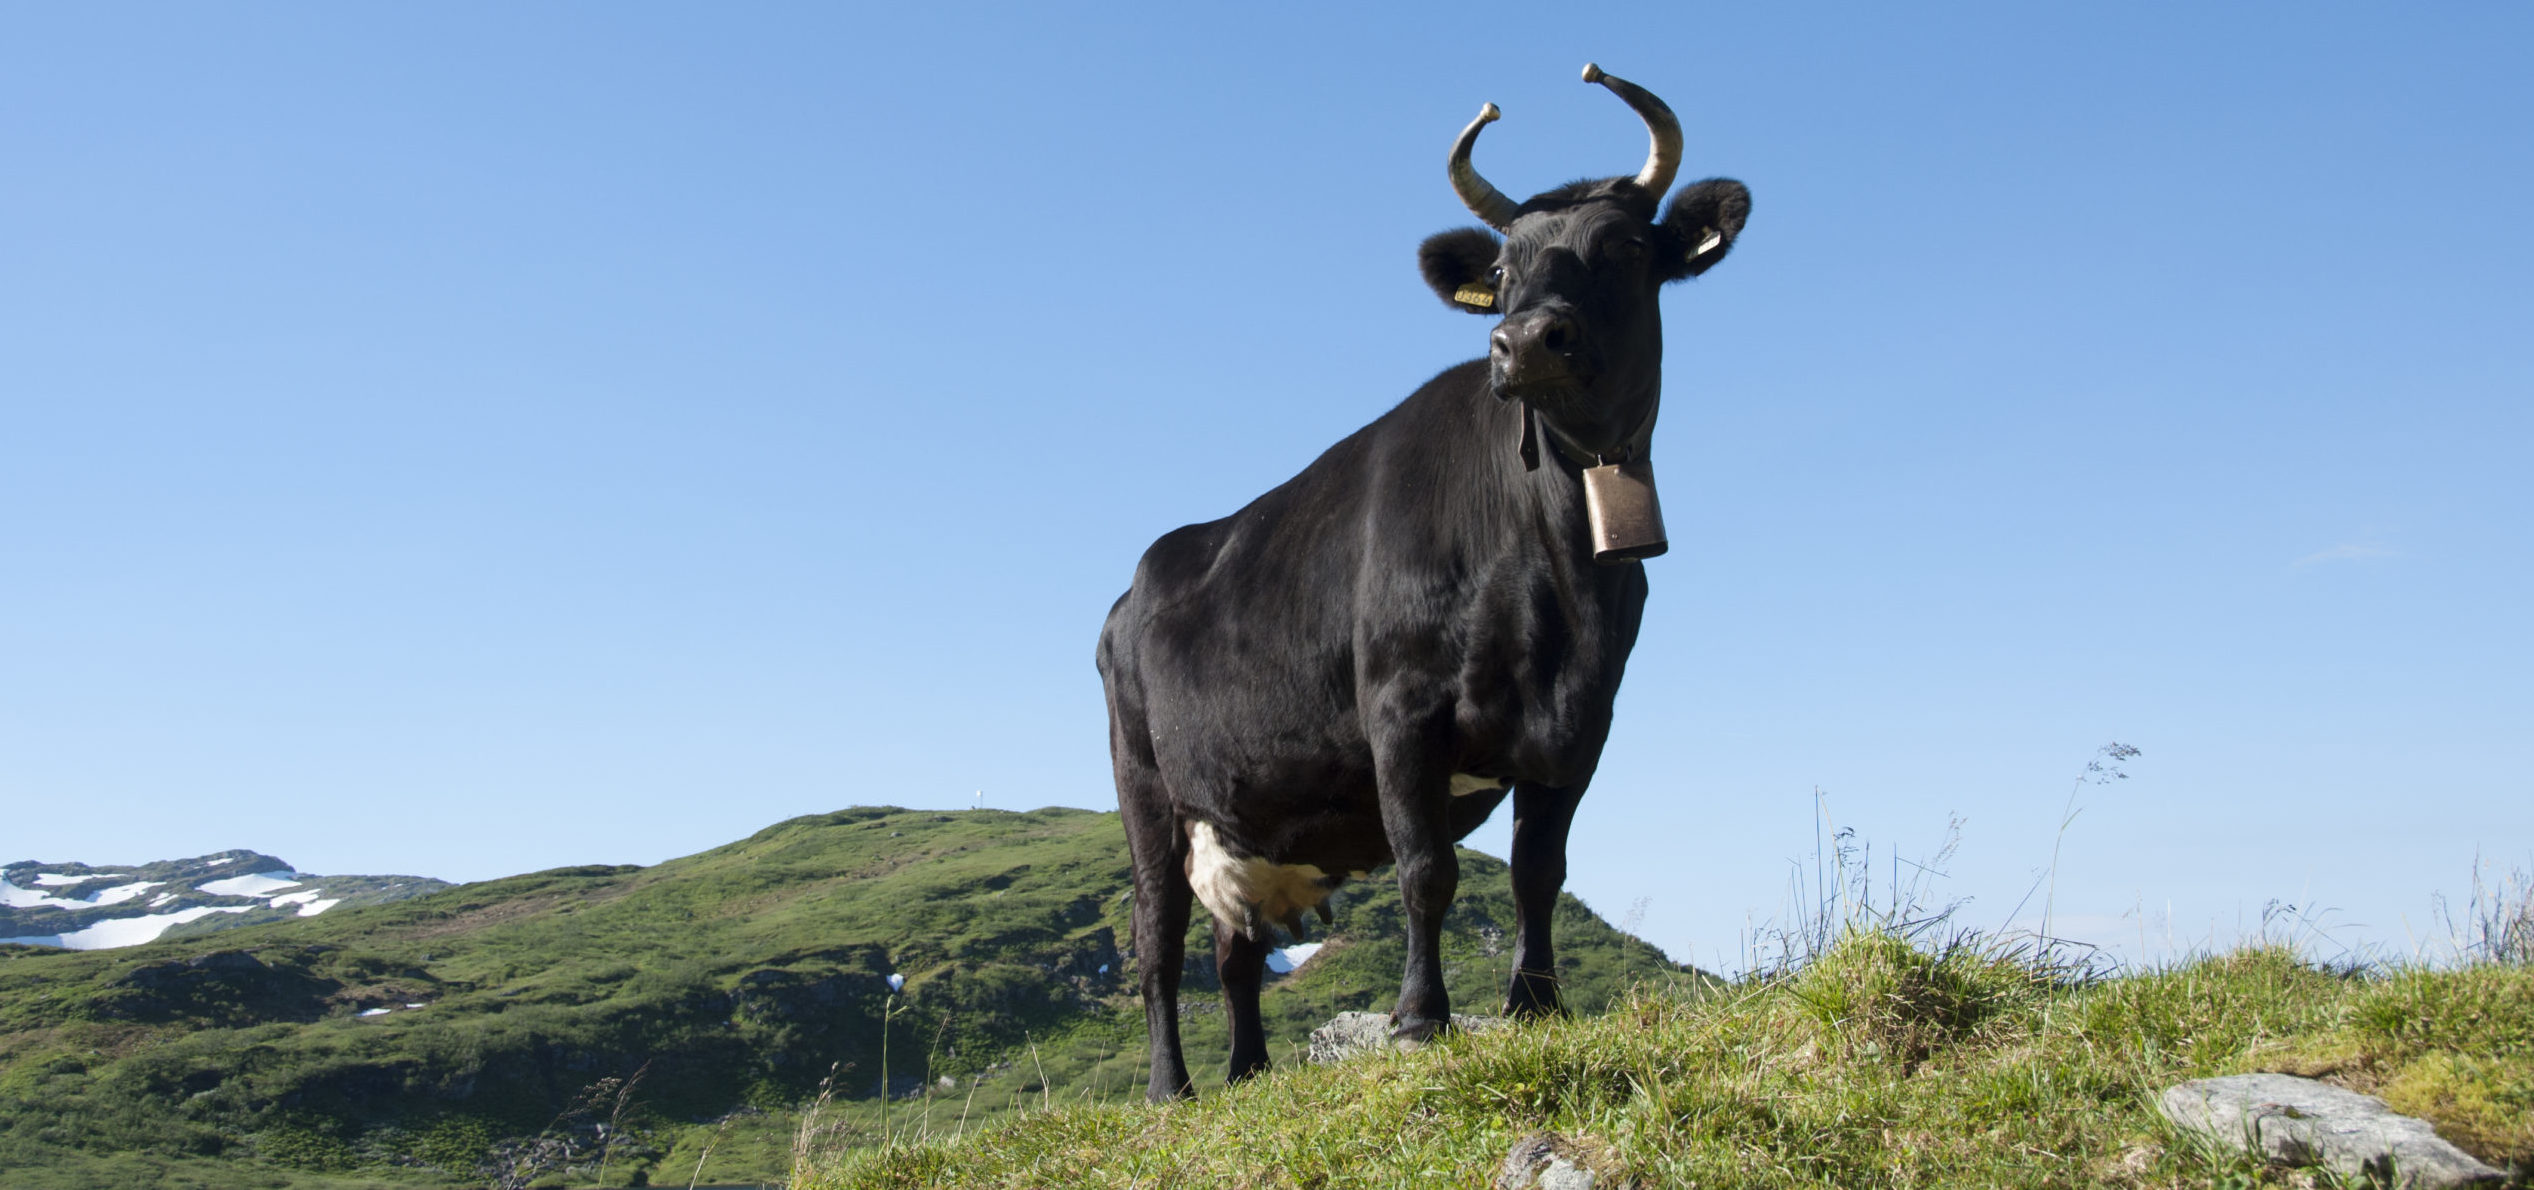 A black cow with hornes looking, with blue sky in the background